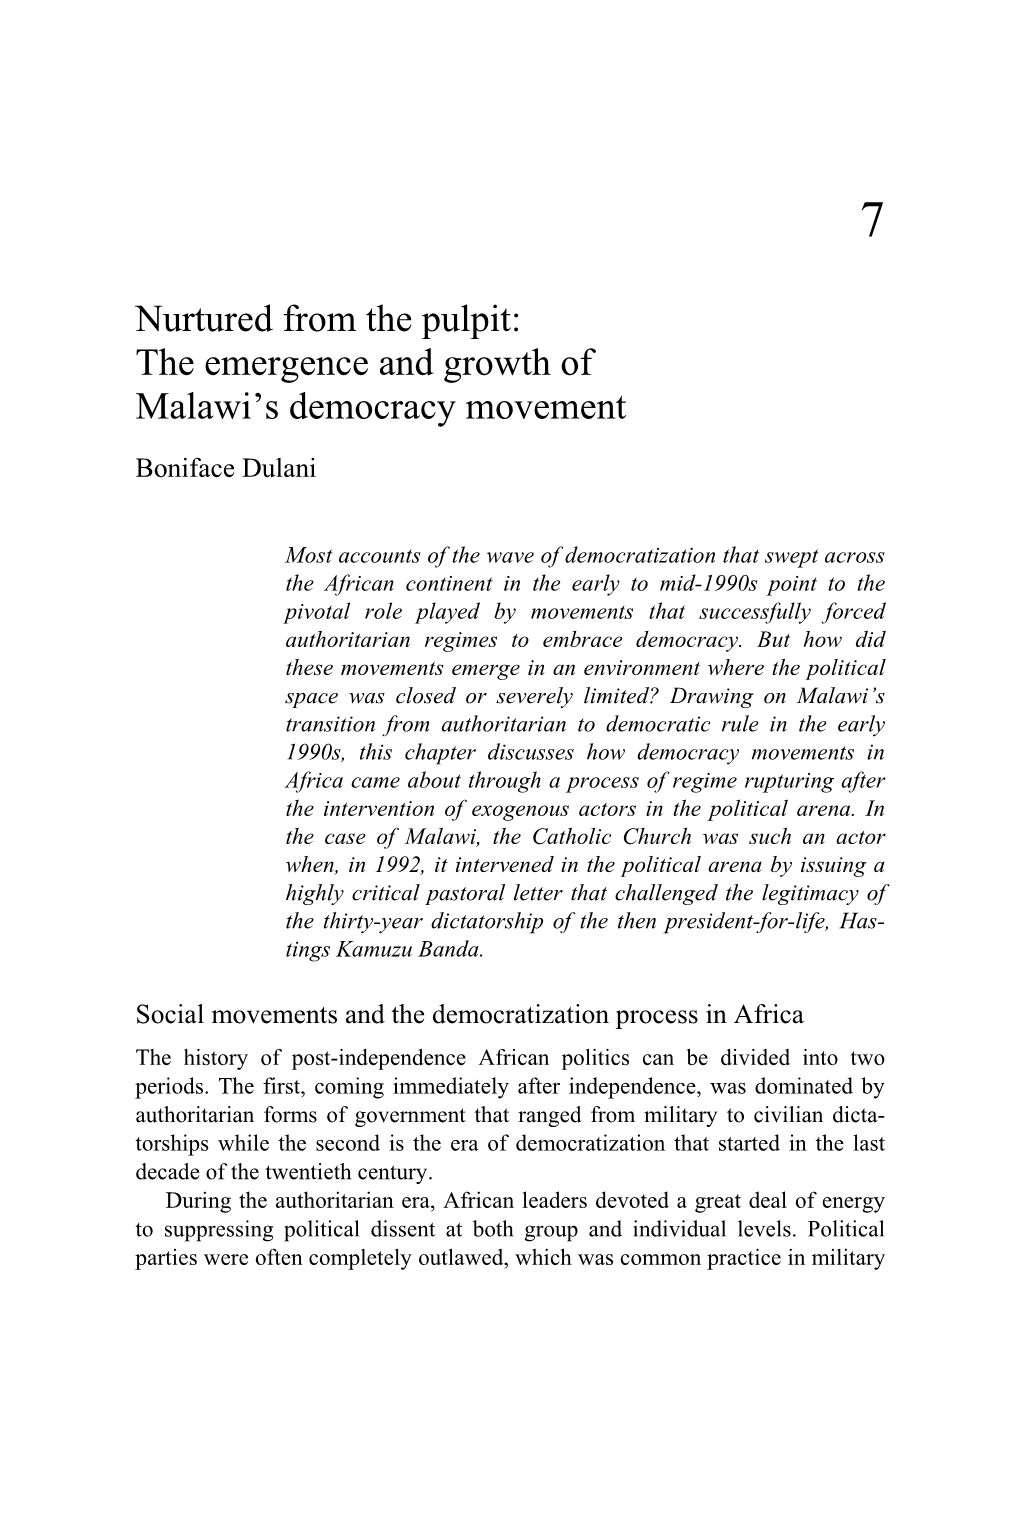 Nurtured from the Pulpit: the Emergence and Growth of Malawi's Democracy Movement